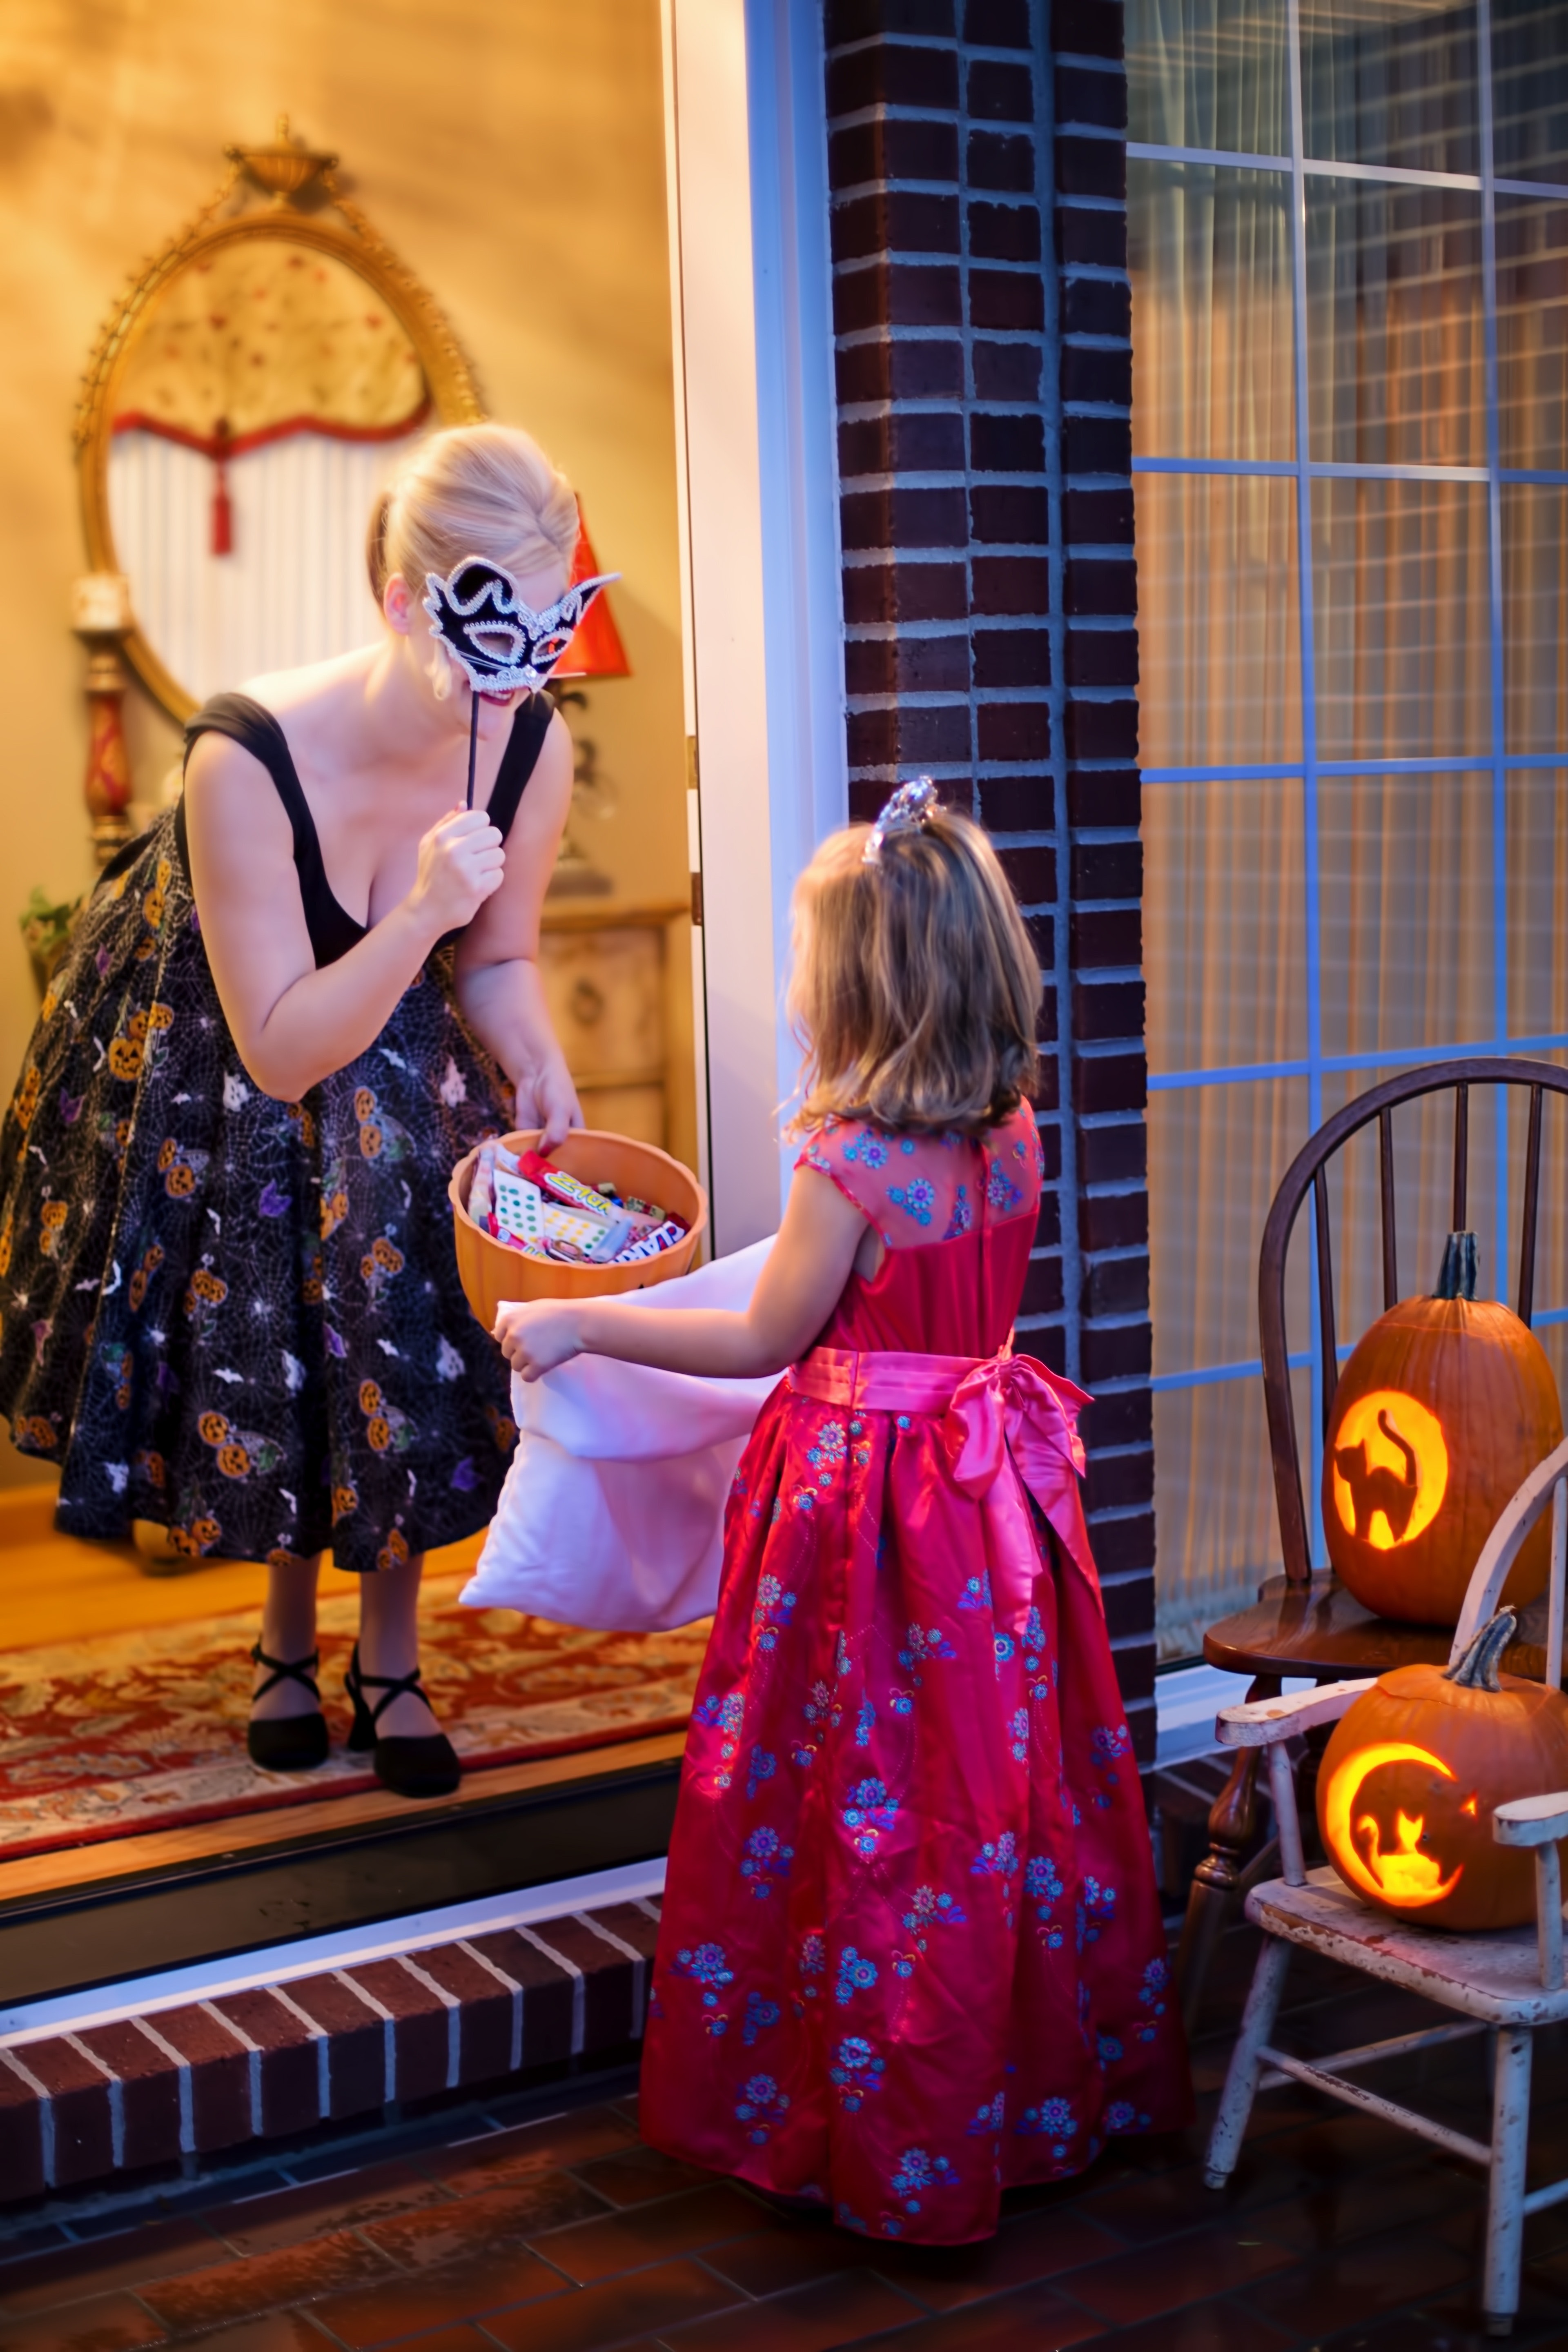 How to avoid overstimulation and make Halloween fun for kids with Autism